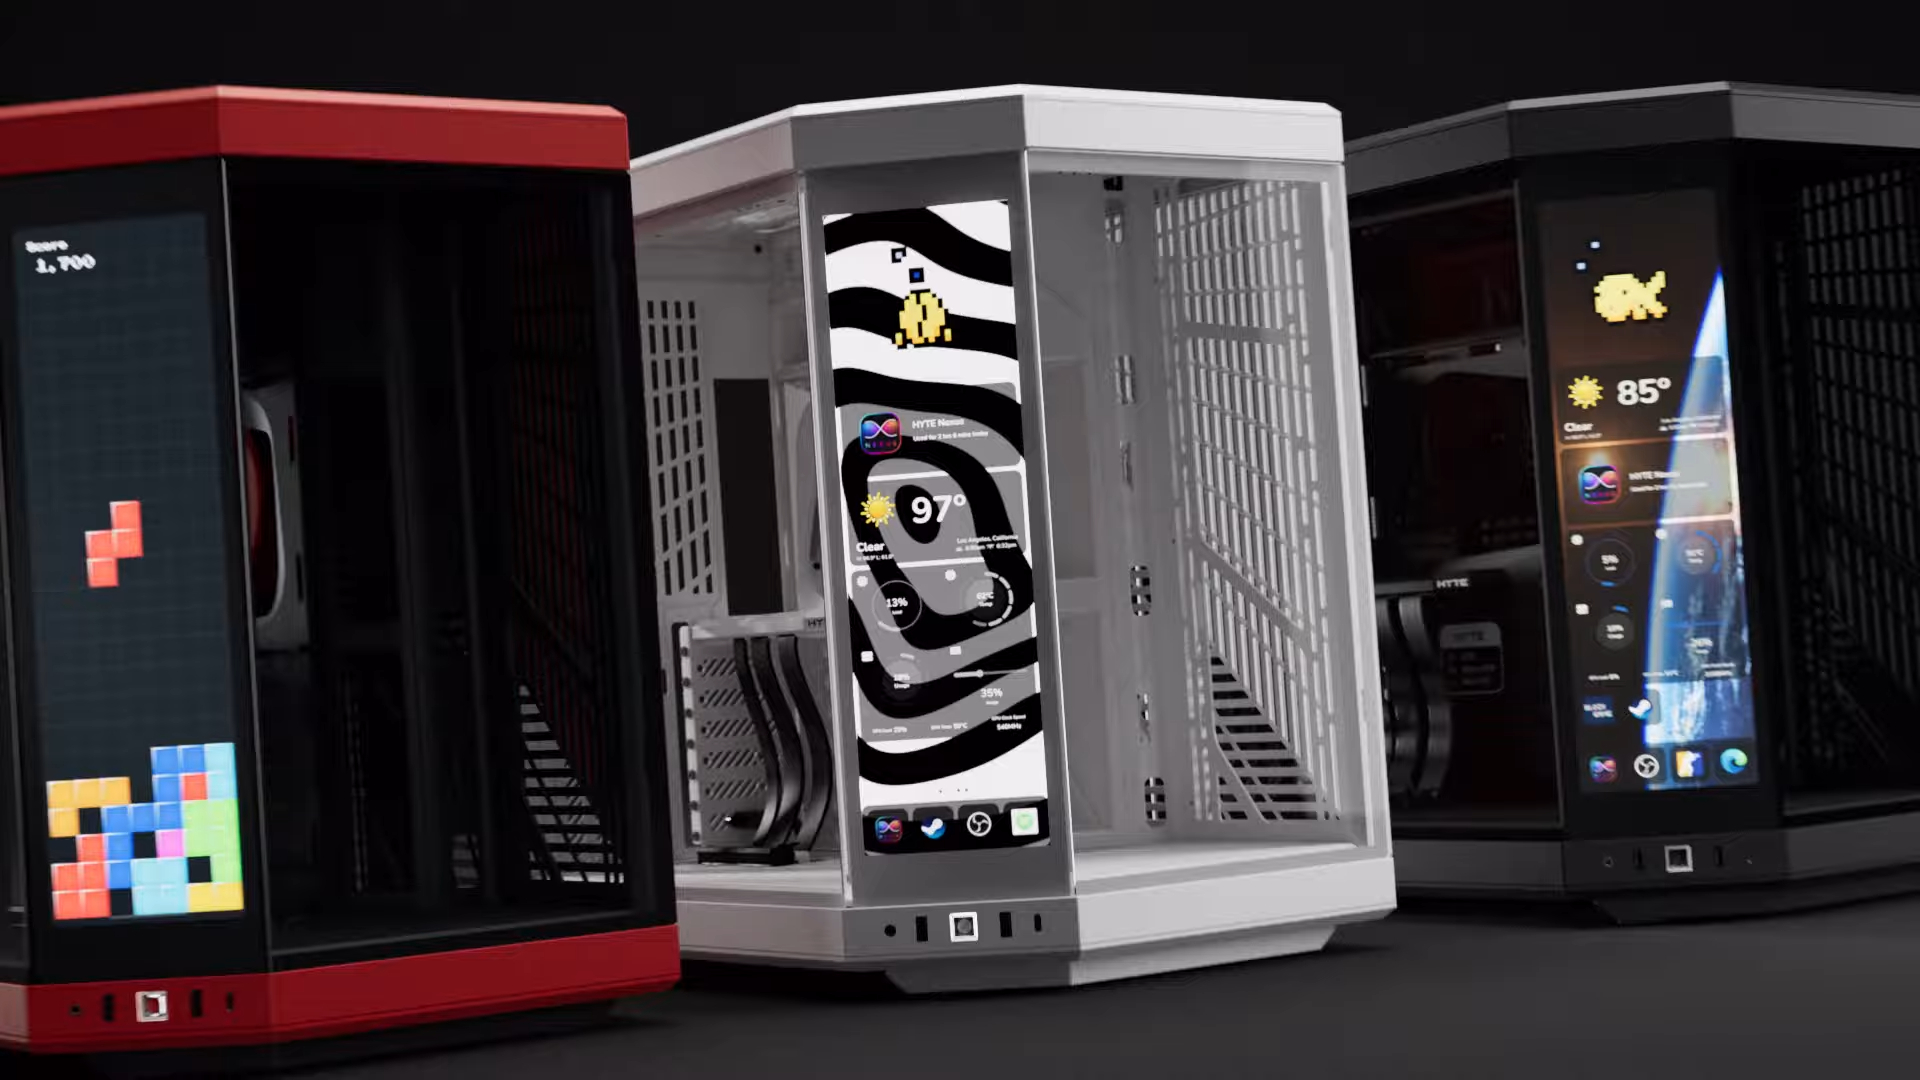 New Hyte Y70 Touch PC case comes loaded with a 4K touchscreen